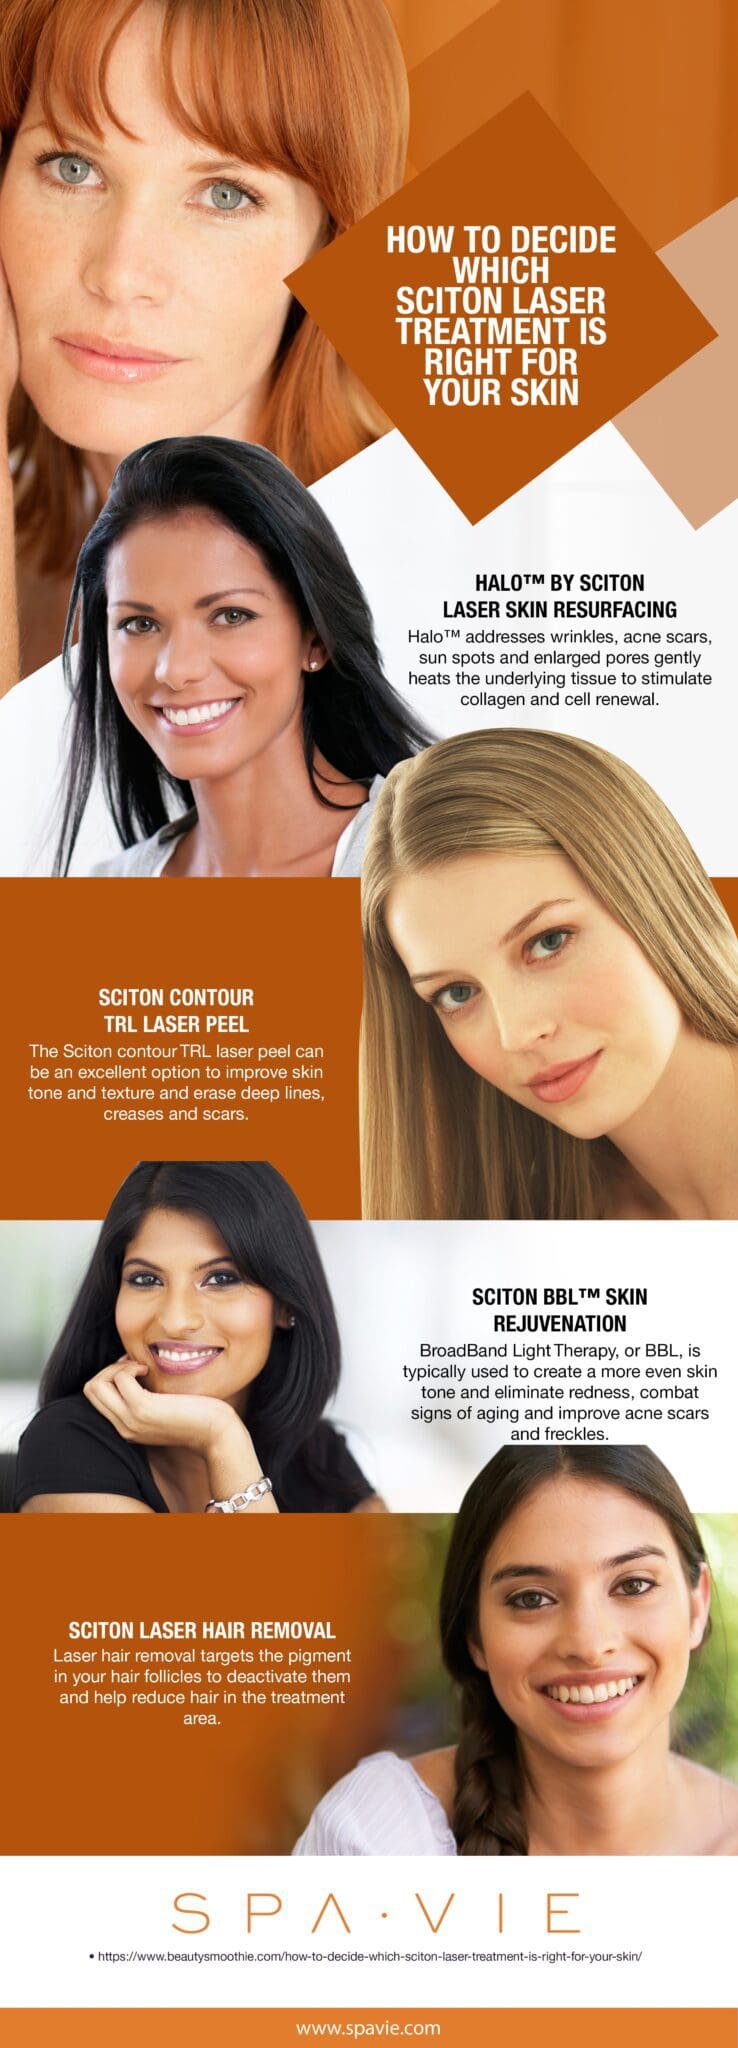 How to Decide Which Sciton Laser Treatment Is Right for Your Skin [Infographic]